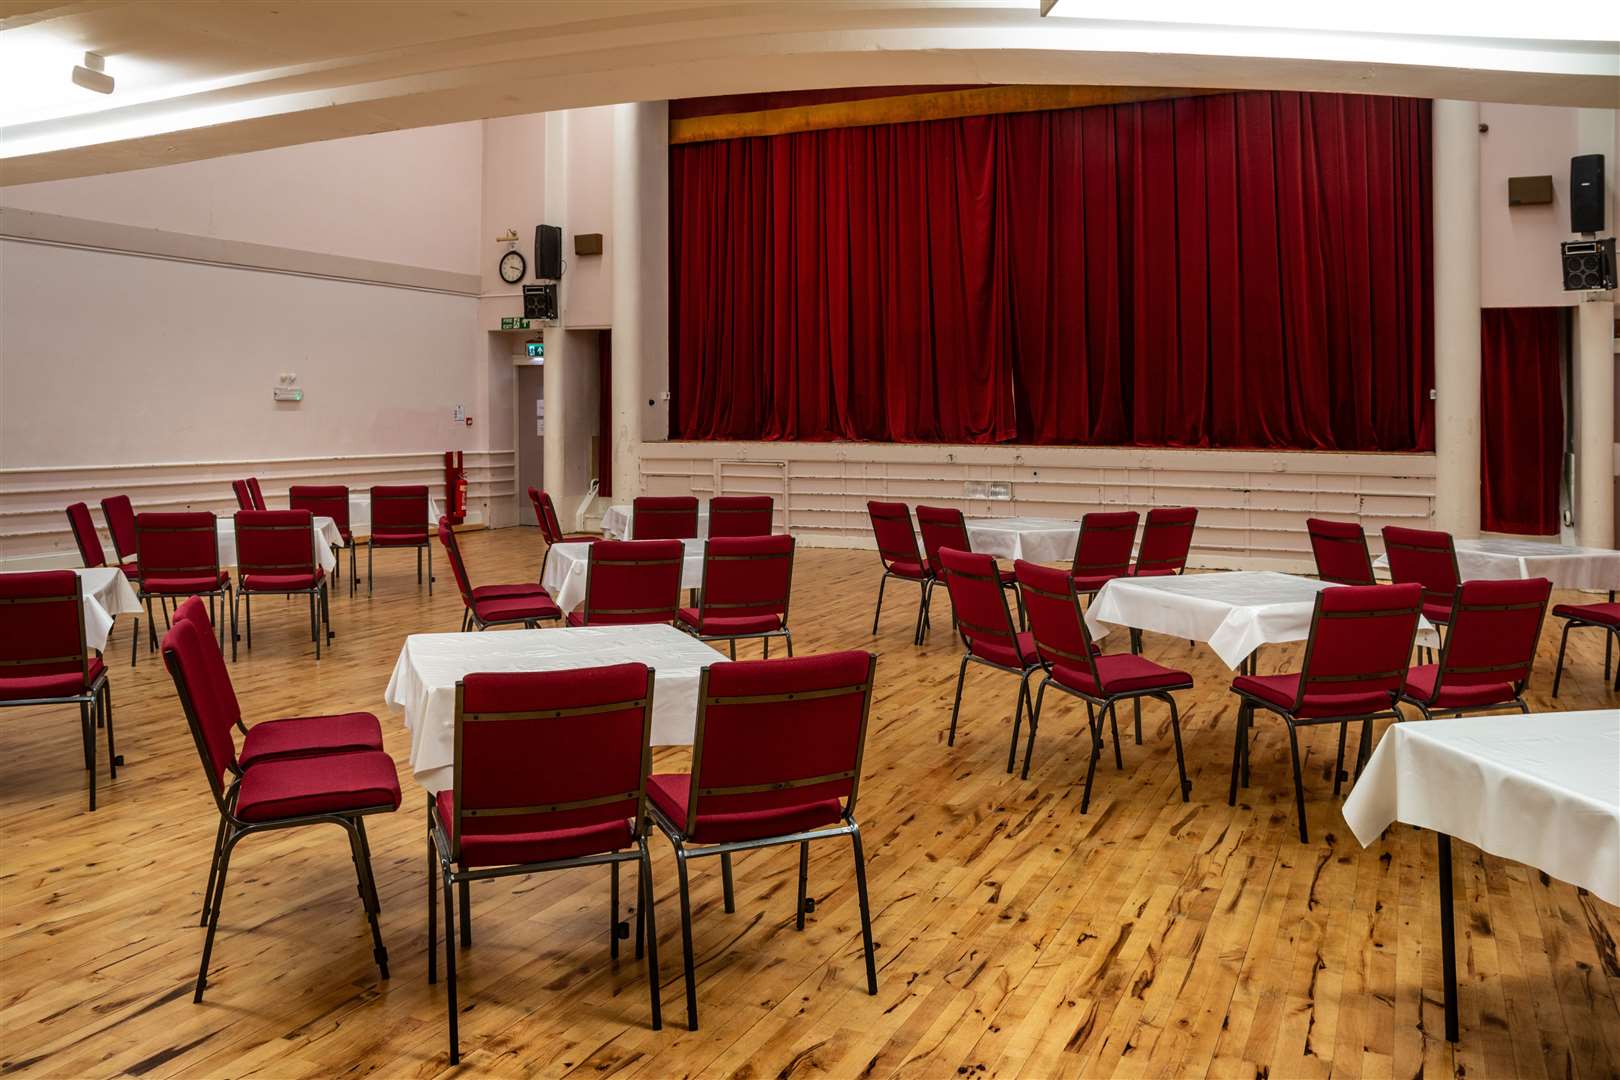 The main hall is ideal for functions, entertainment and large meetings.